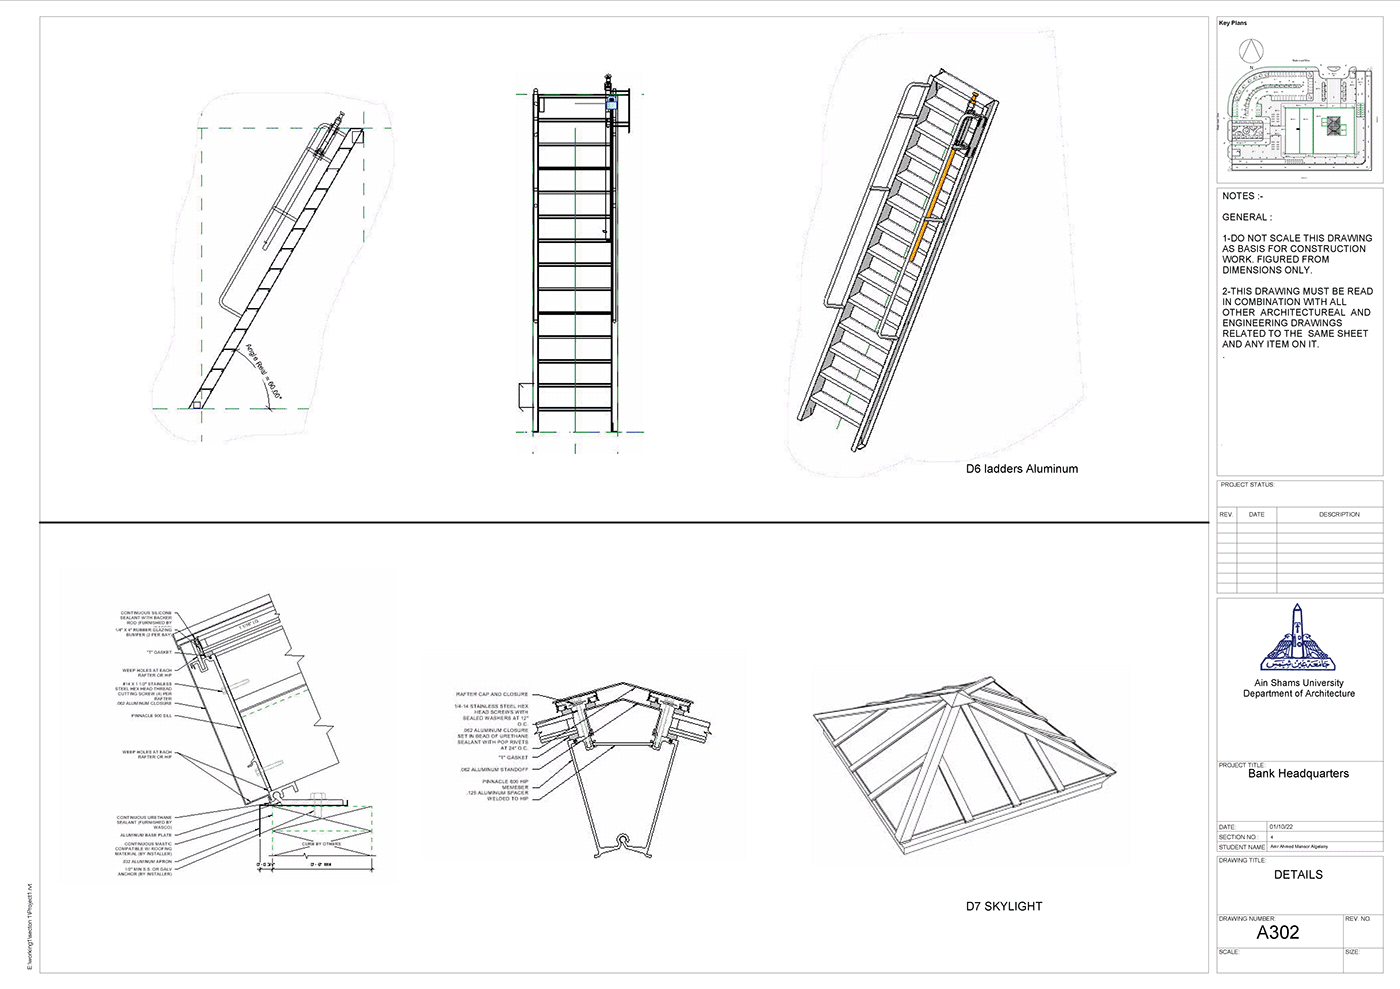 architecture bank headquarter details Elevations floor plans plans revit sections working working drawings